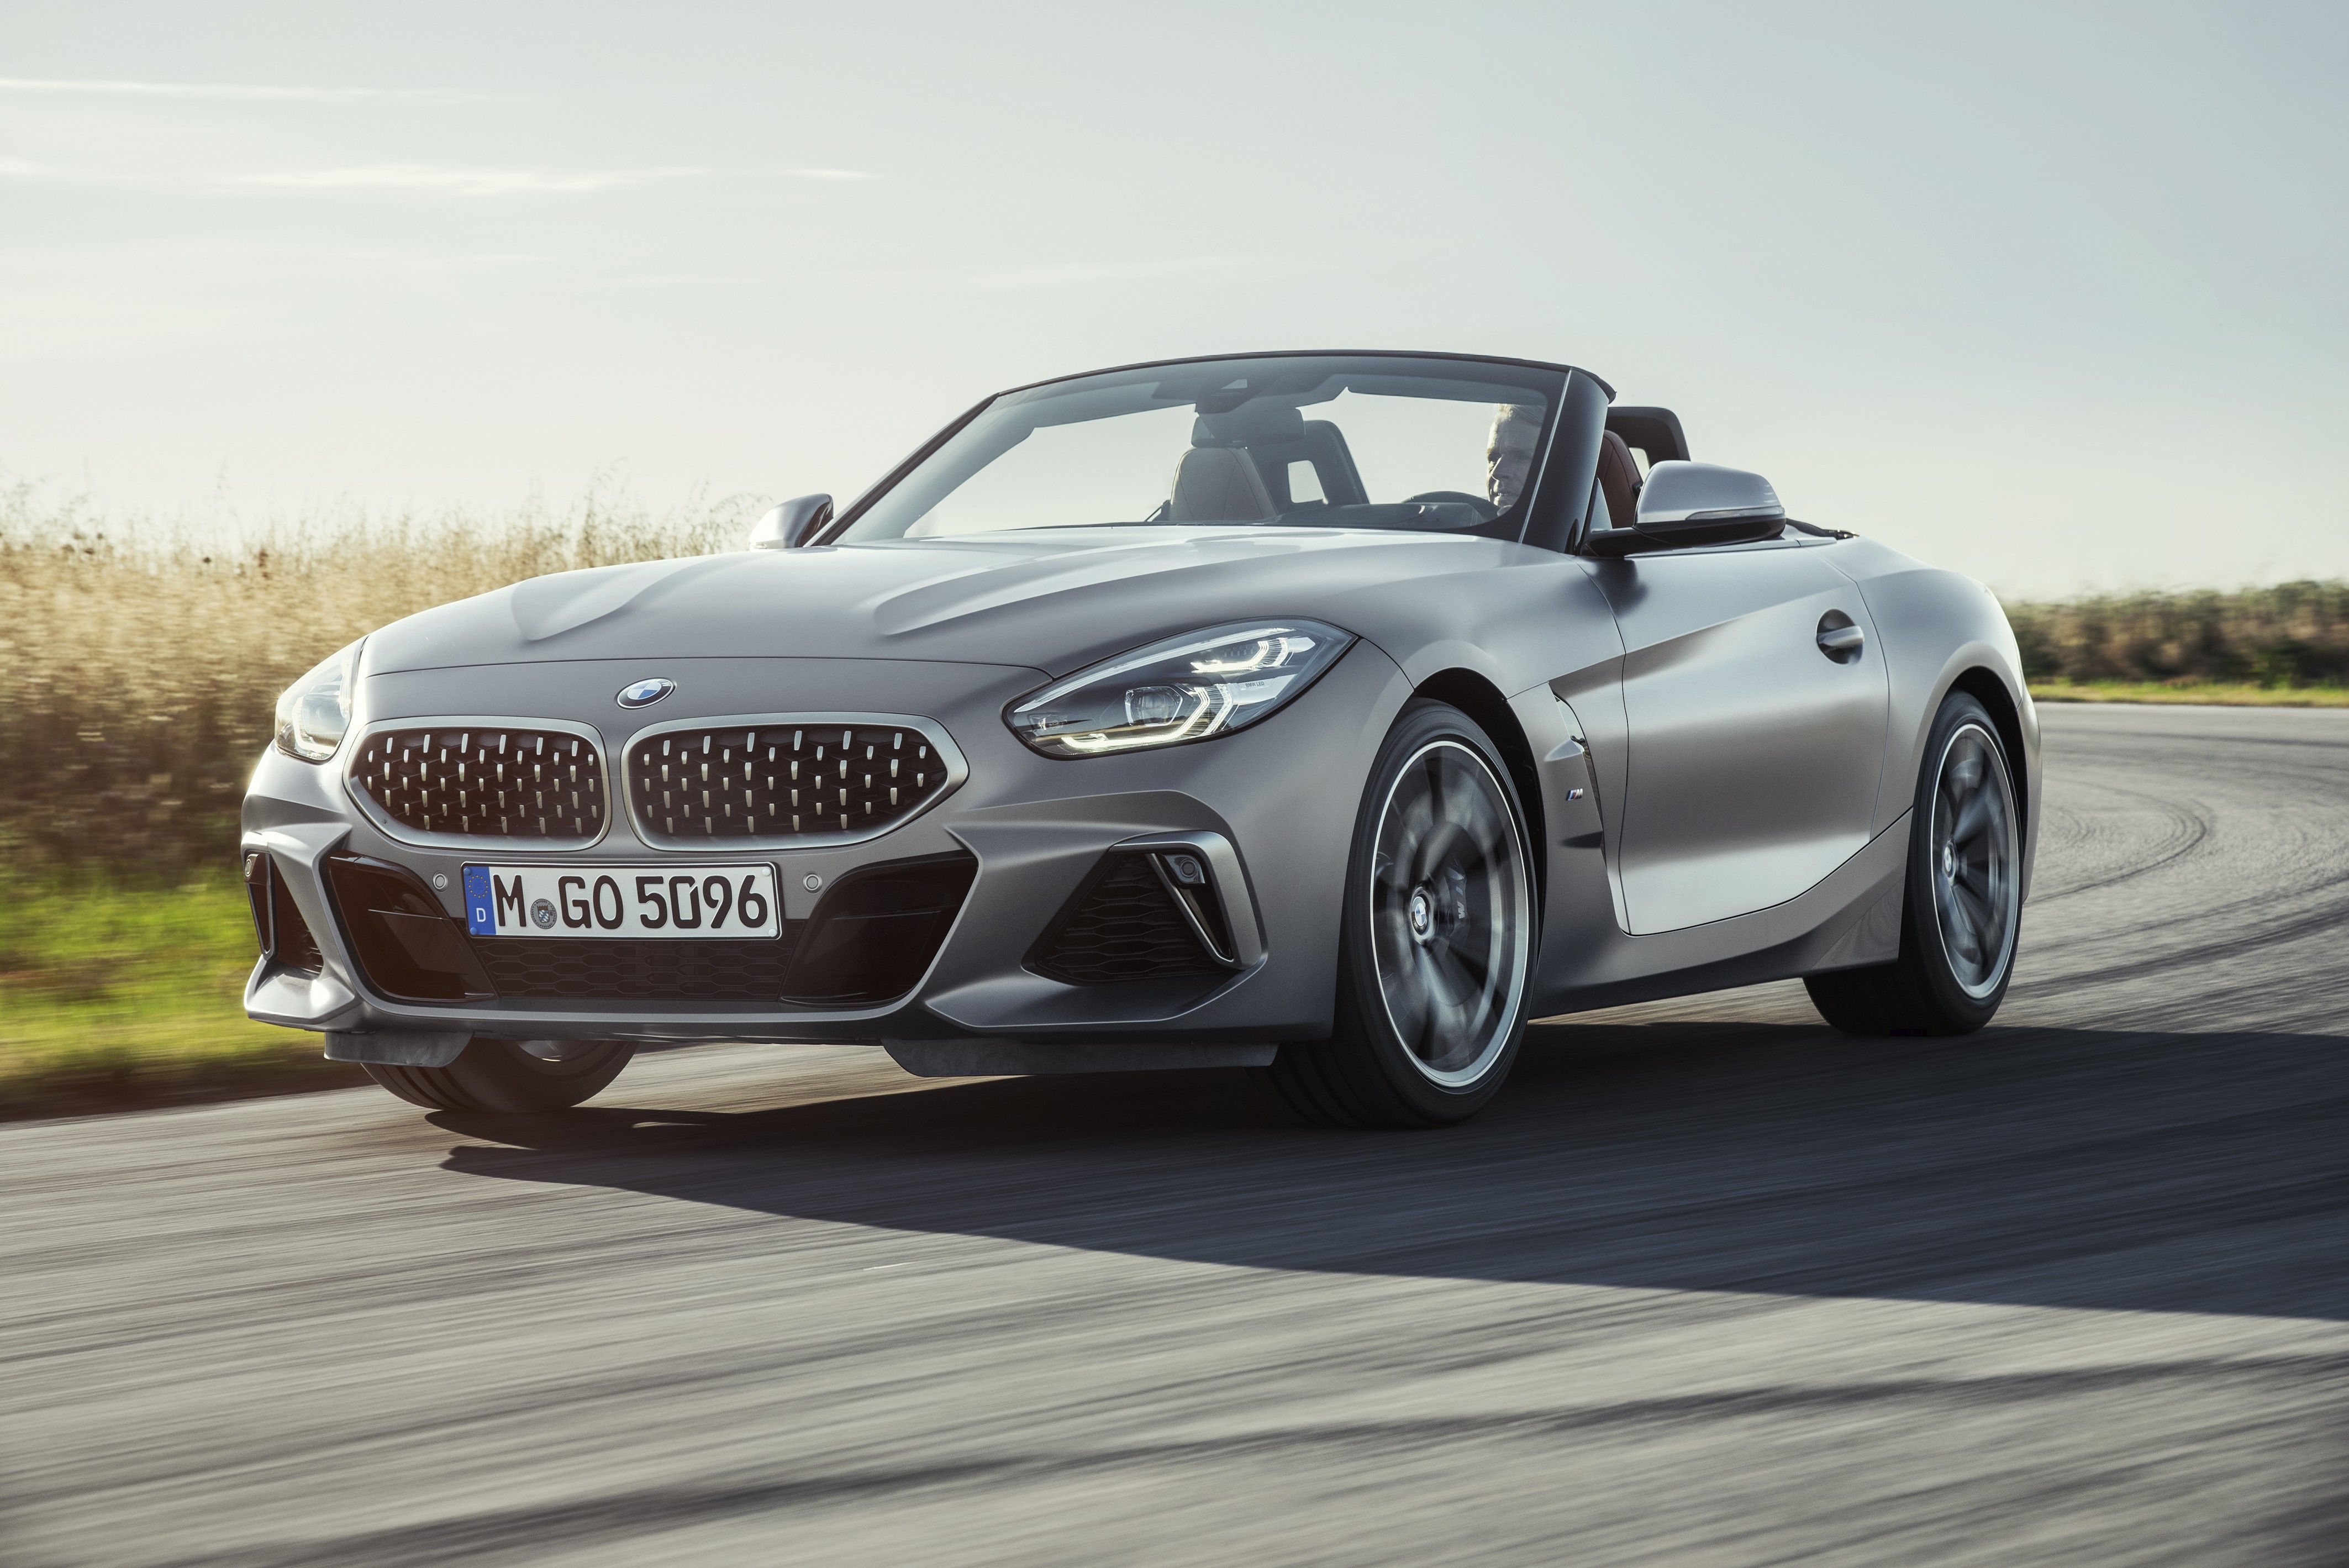 2020 BMW Z4 Full Specs, New Photos Released Ahead of Paris Debut